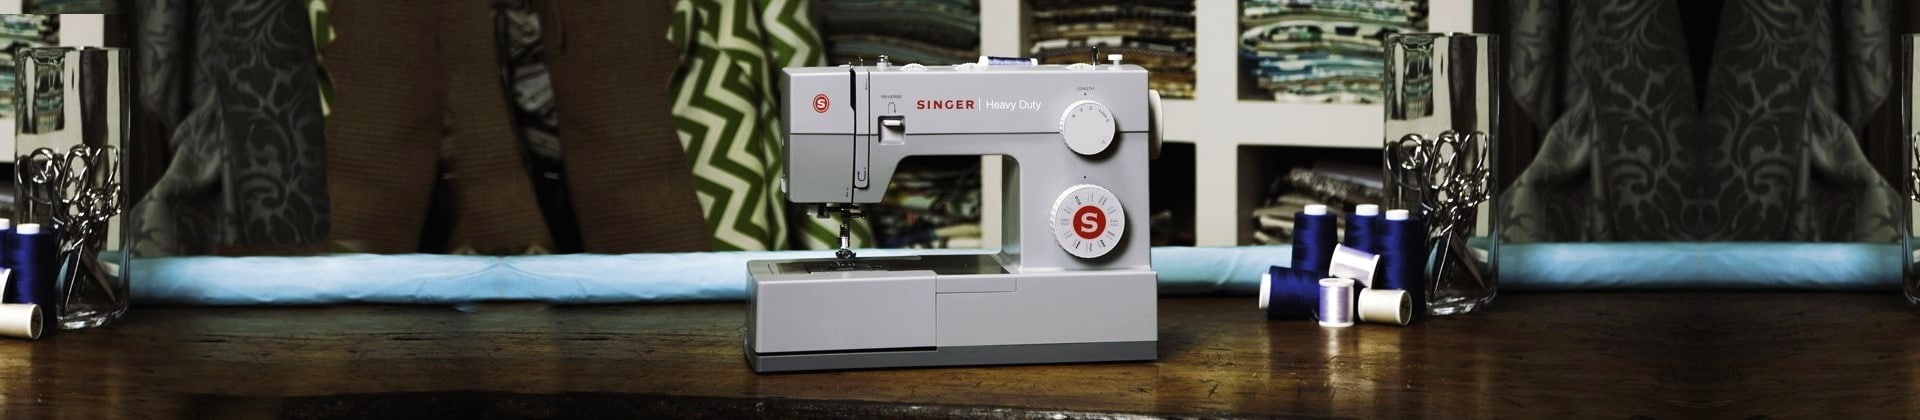 5 Best Computerized Sewing Machines Reviewed In Detail Oct 2020,Vinegar In Laundry To Remove Odor